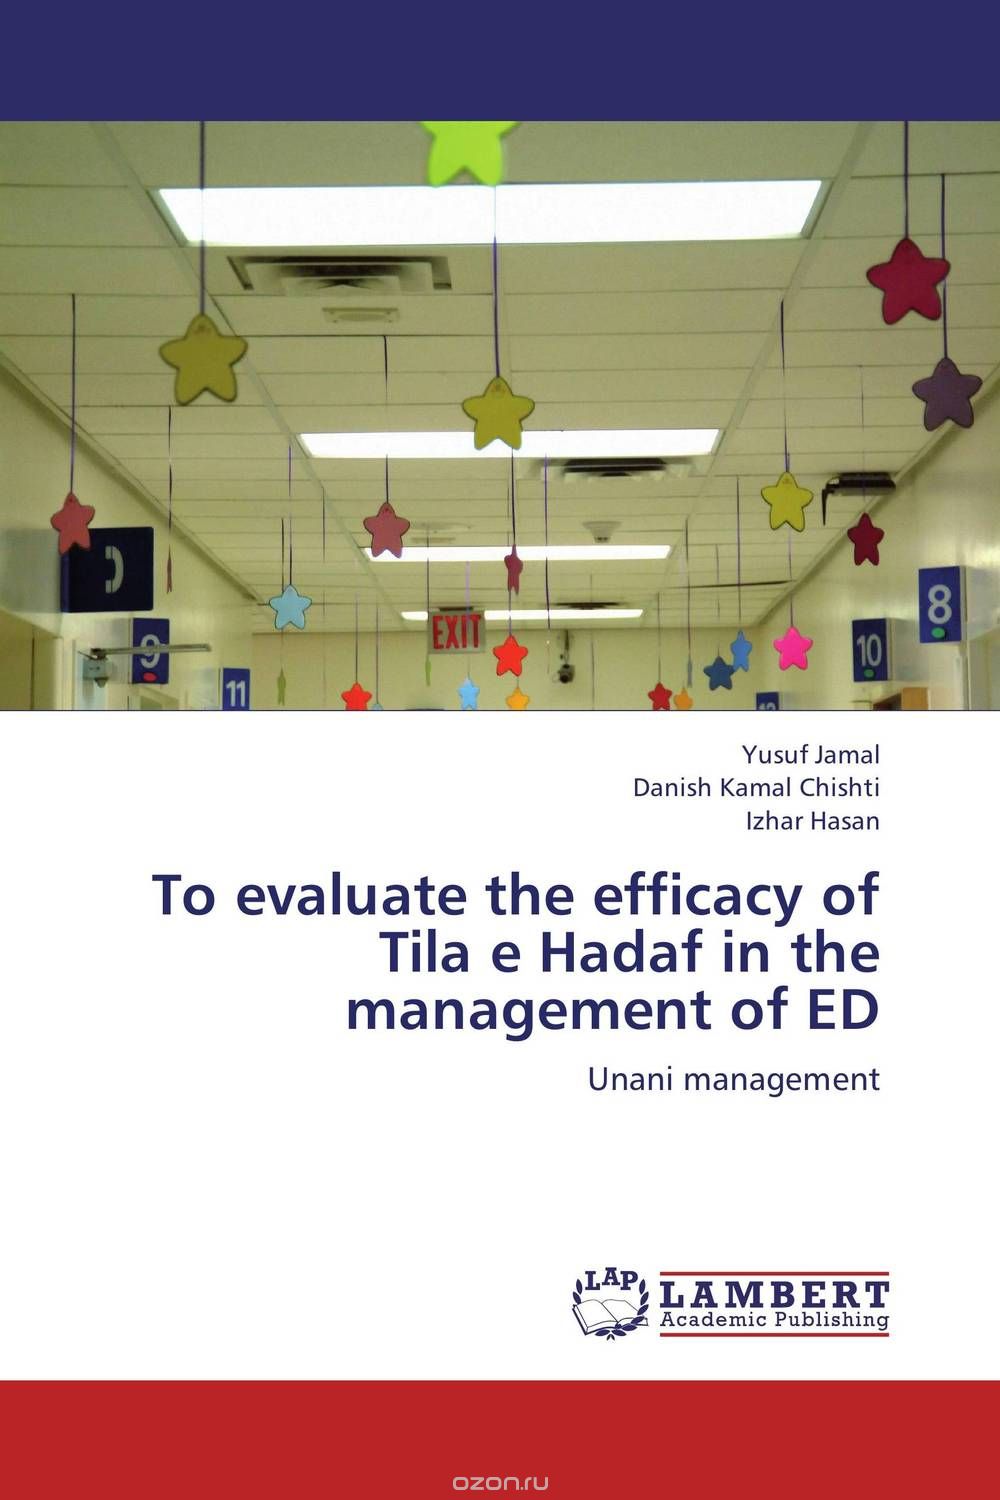 To evaluate the efficacy of Tila e Hadaf in the management of ED